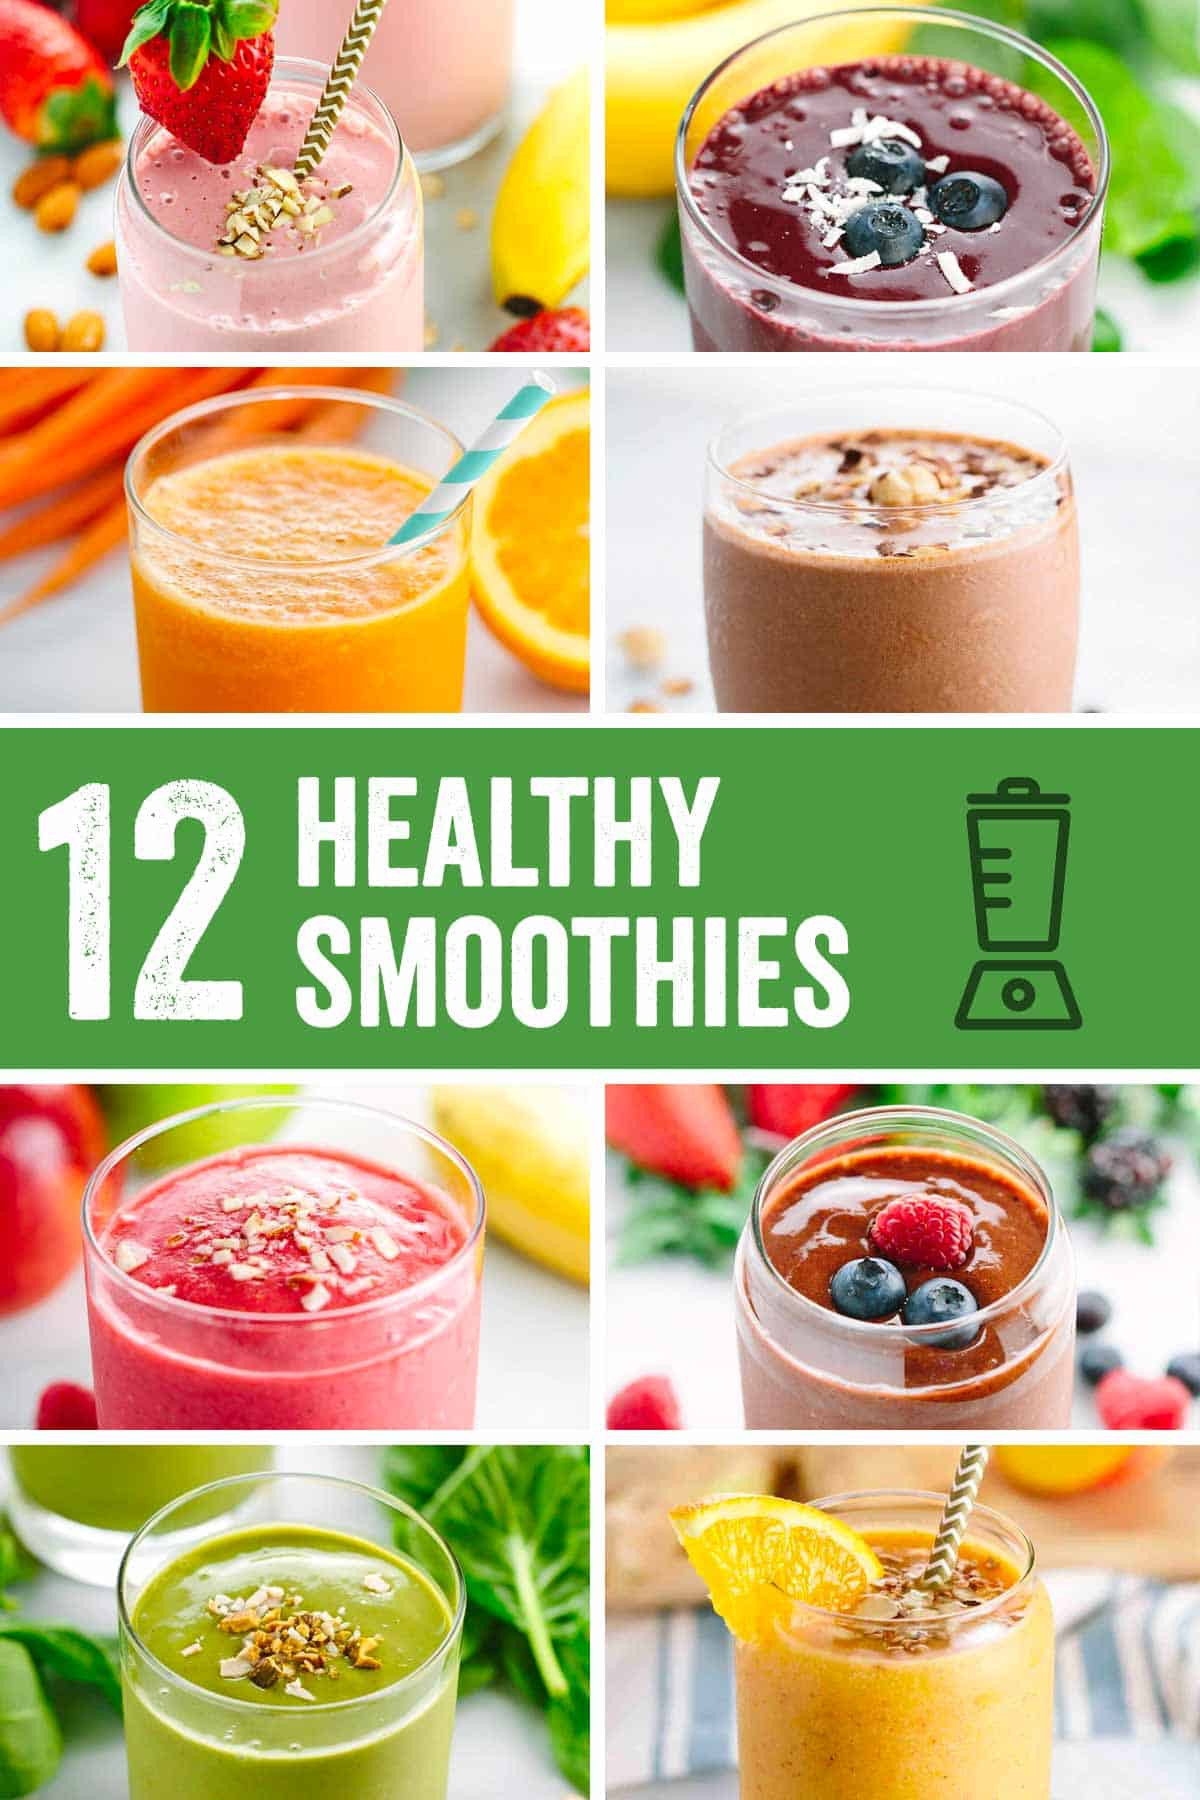 Simple Healthy Smoothies
 Roundup Easy Five Minute Healthy Smoothie Recipes